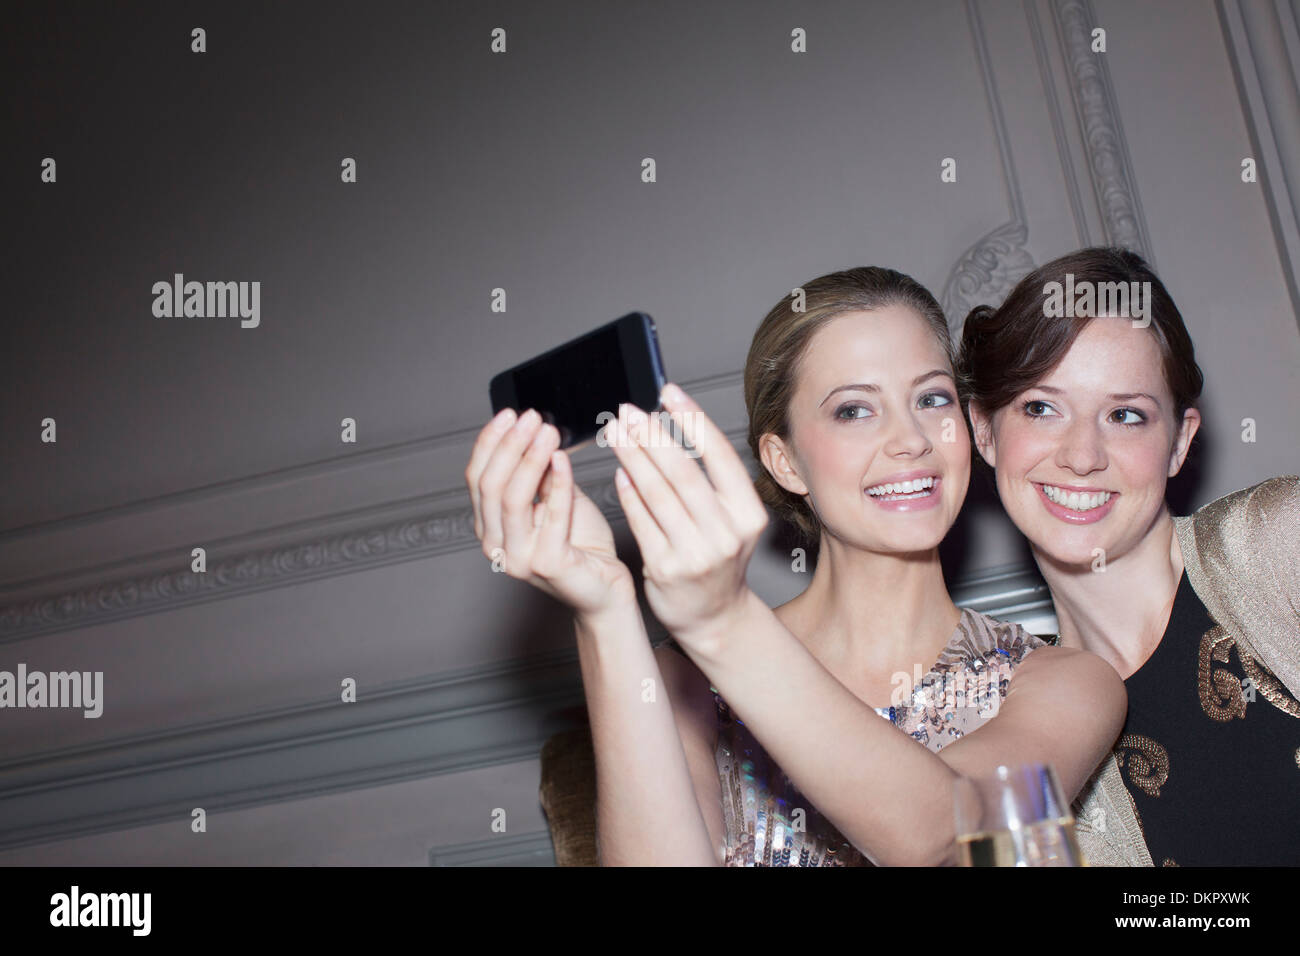 Smiling women taking self-portrait with camera phone Banque D'Images